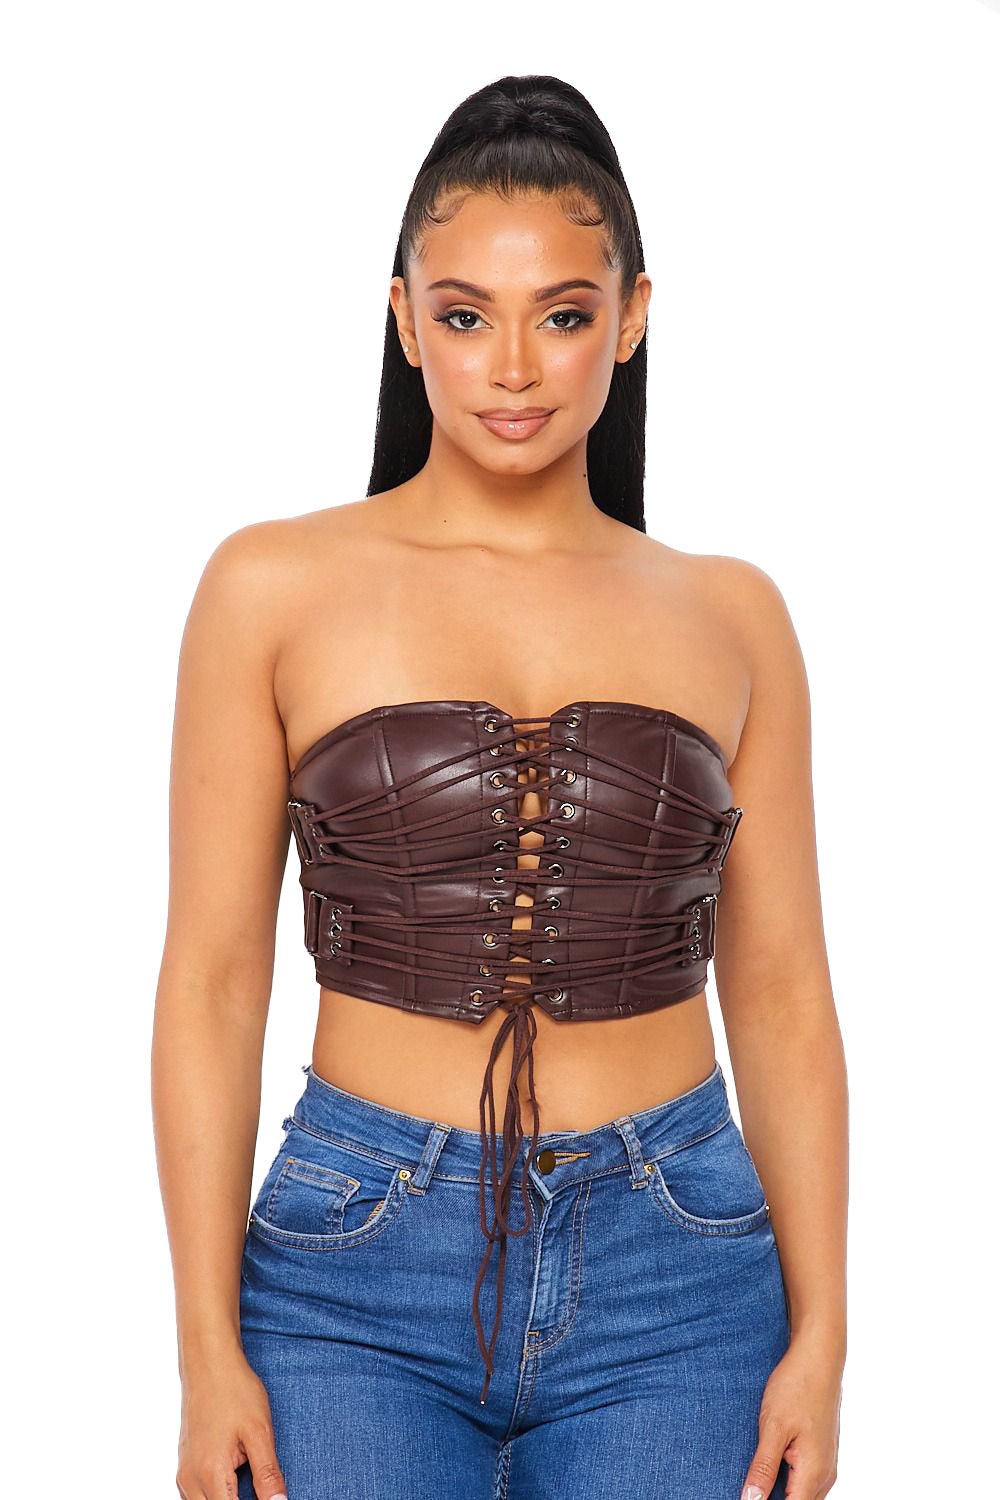 Vegan Leather Lace Up Tube Top Hot & Delicious